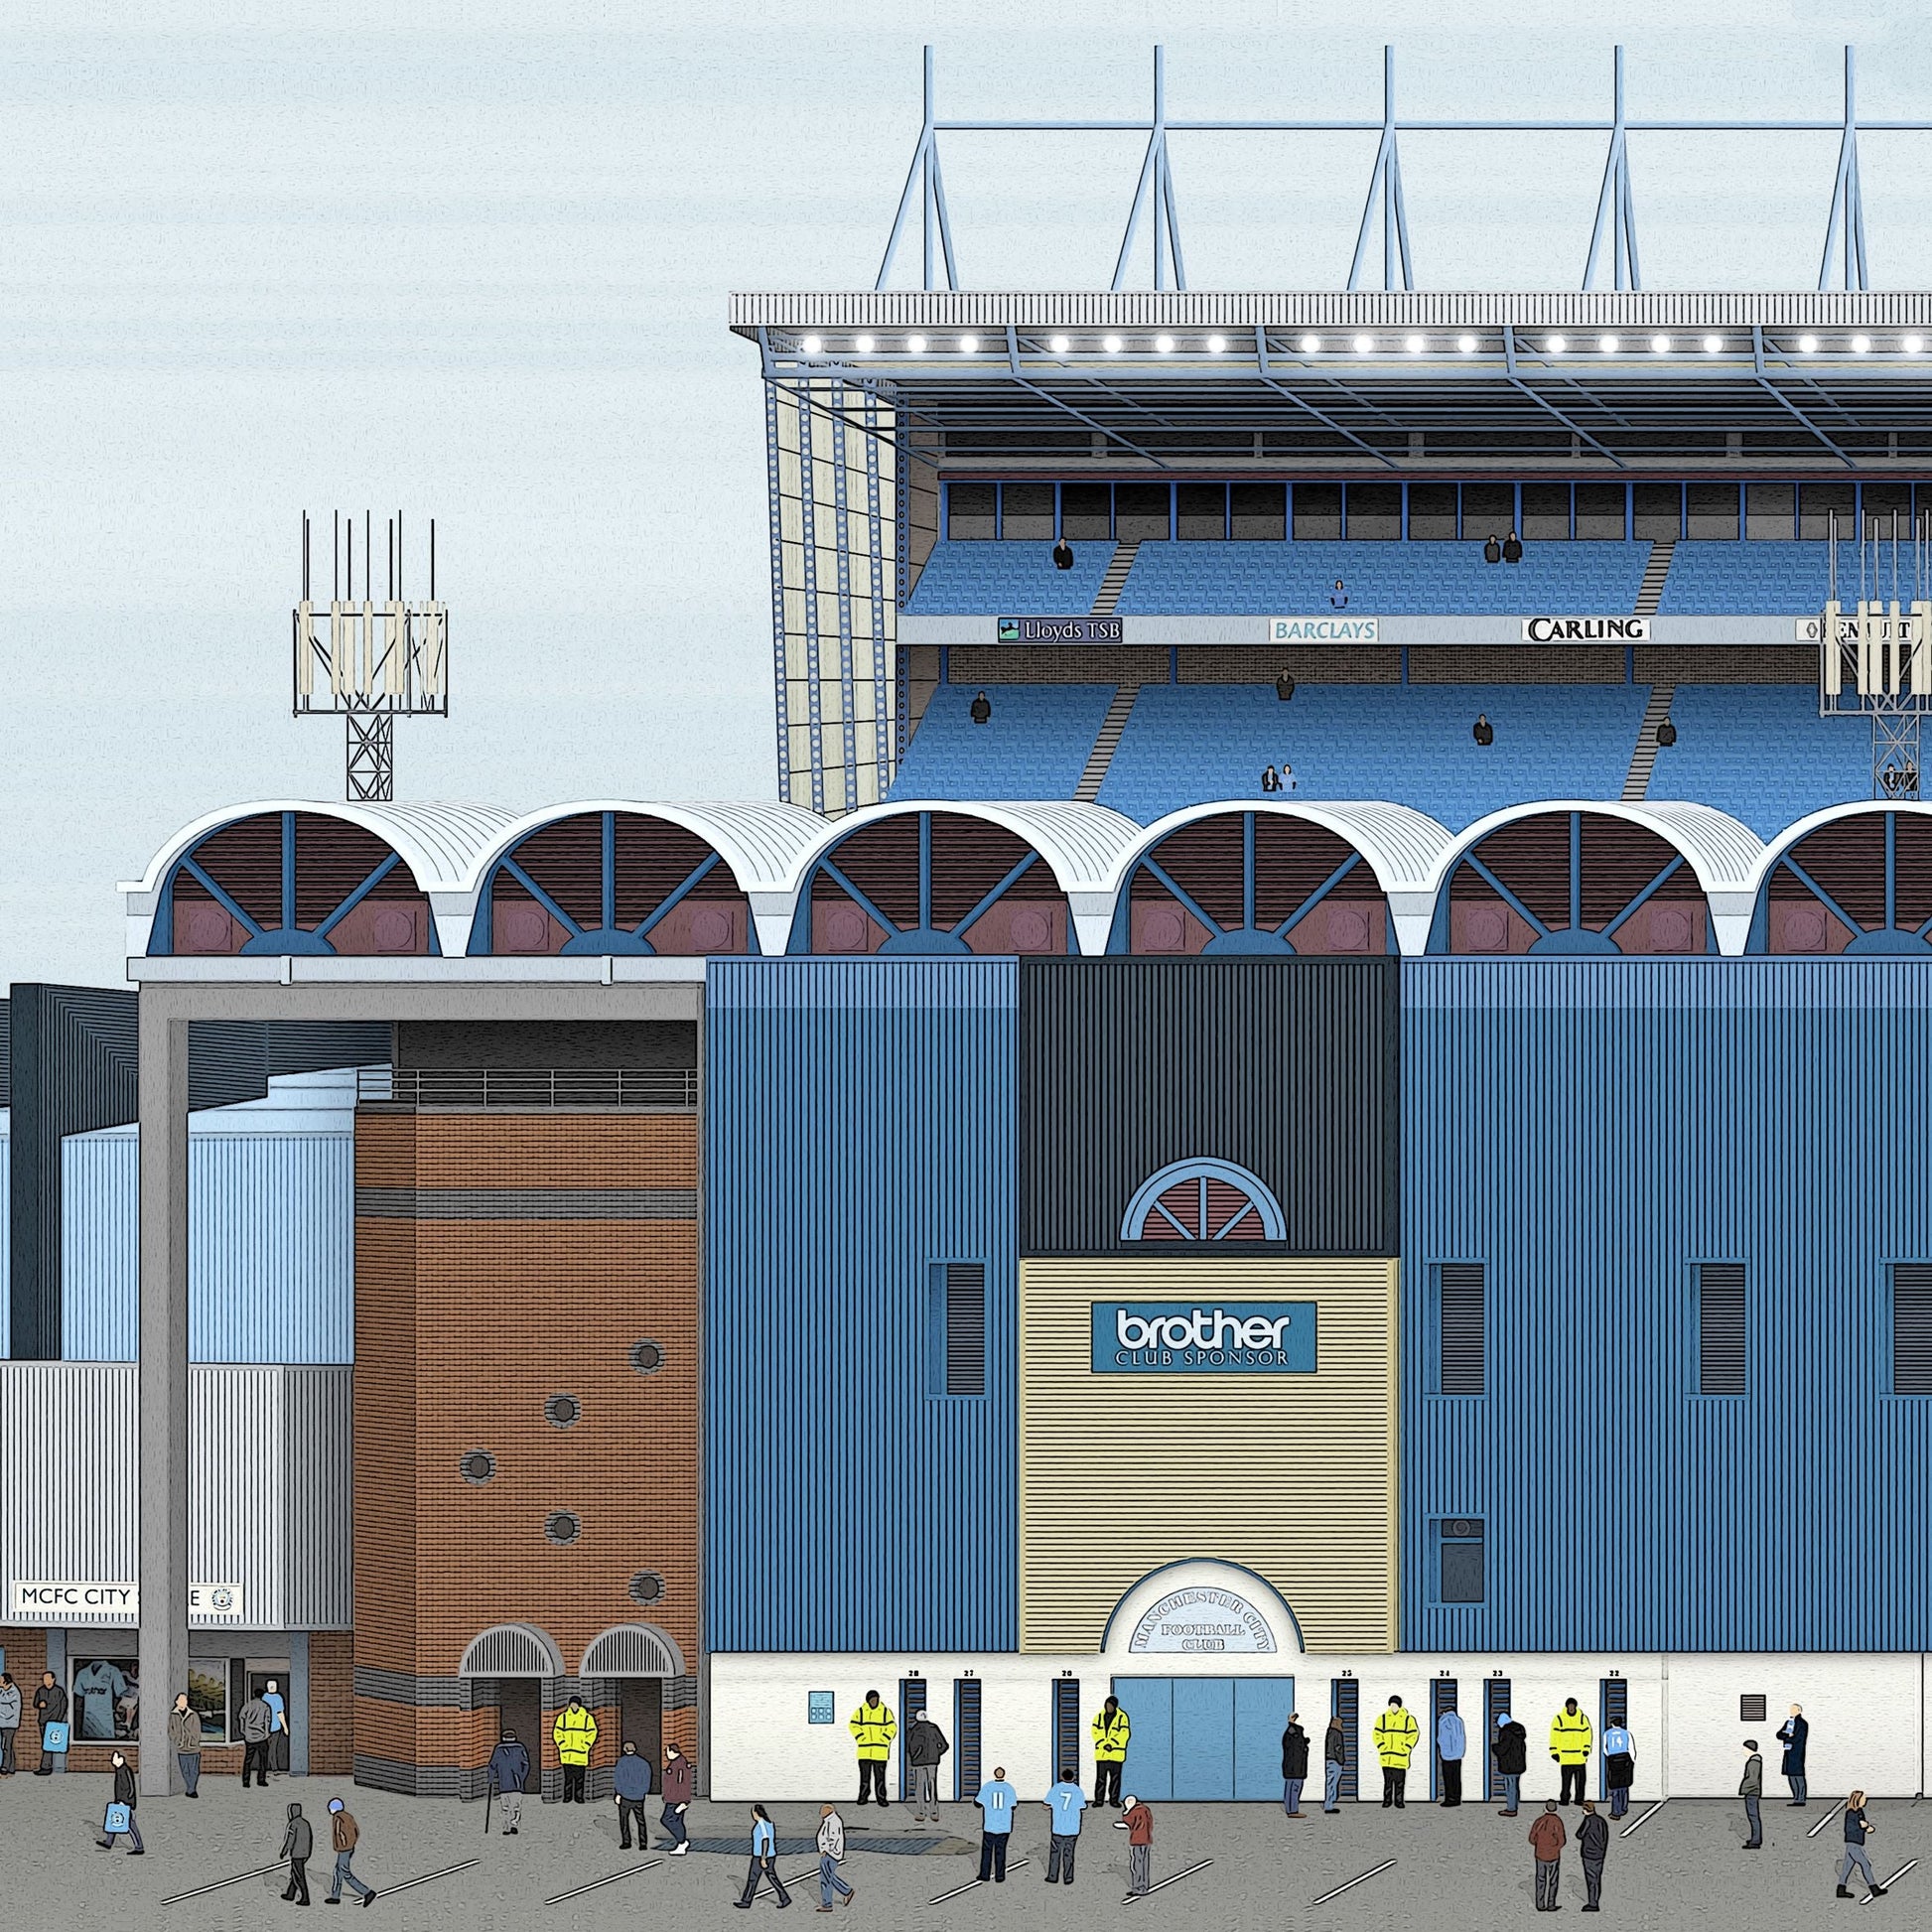 Maine Road Panoramic Print - North Section